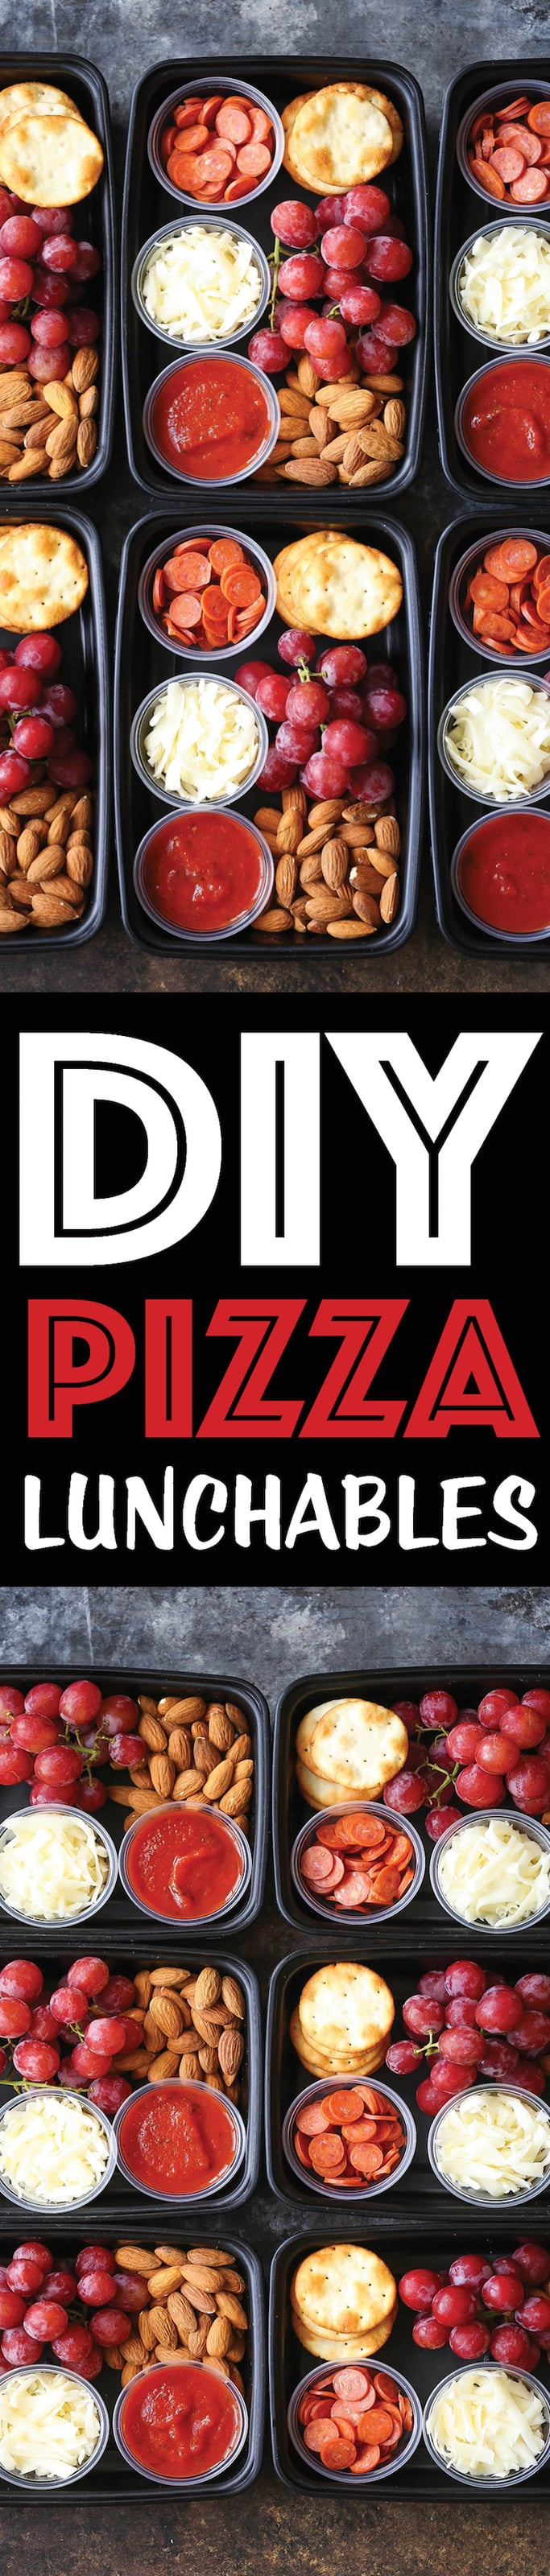 DIY Pizza Lunchables